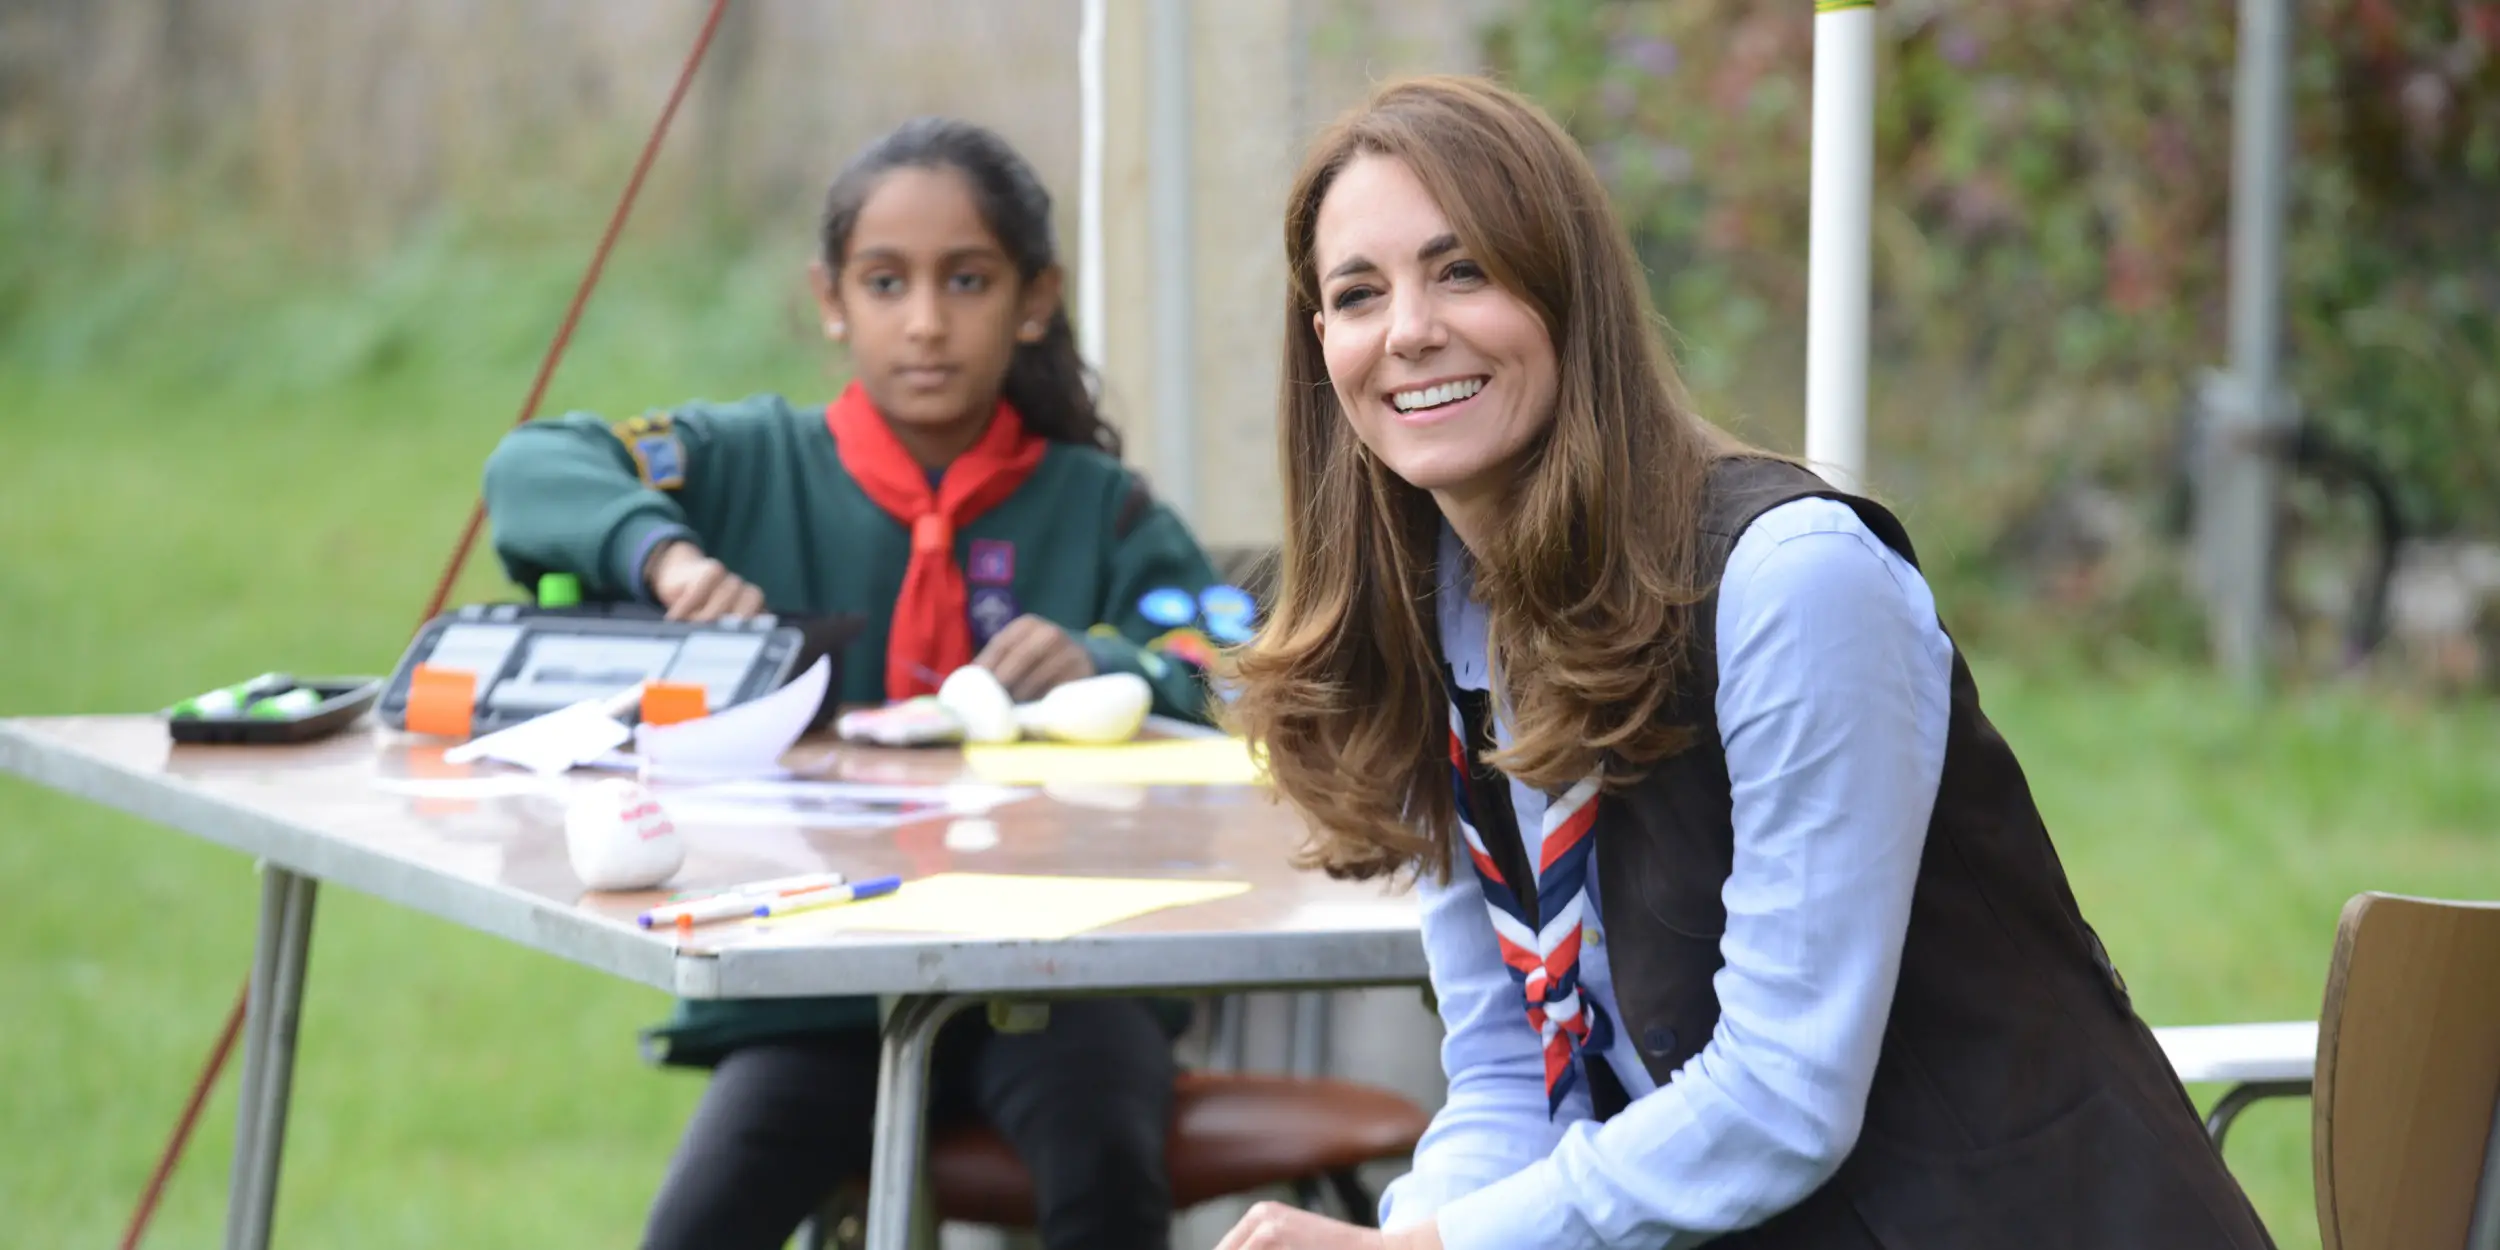 The Duchess of Cambridge got a new role - Joint President of the Scouts Association